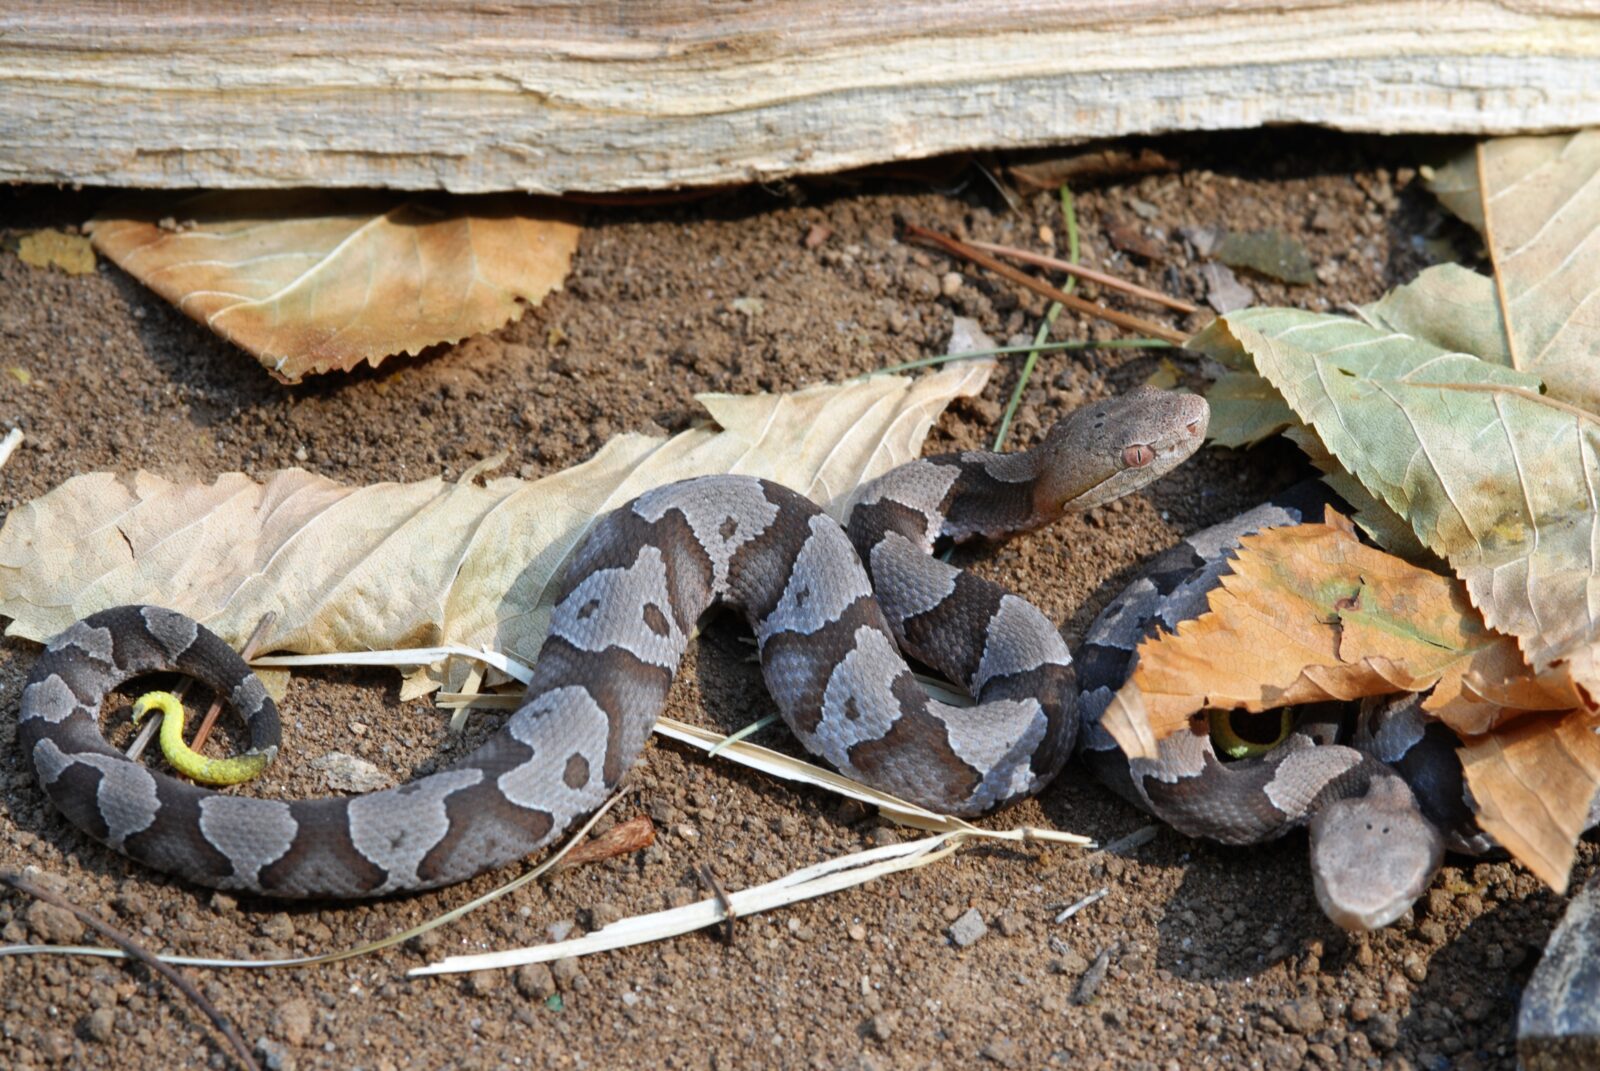 An image of juvenile eastern copperheads with their distinctive hourglass shaped spots 